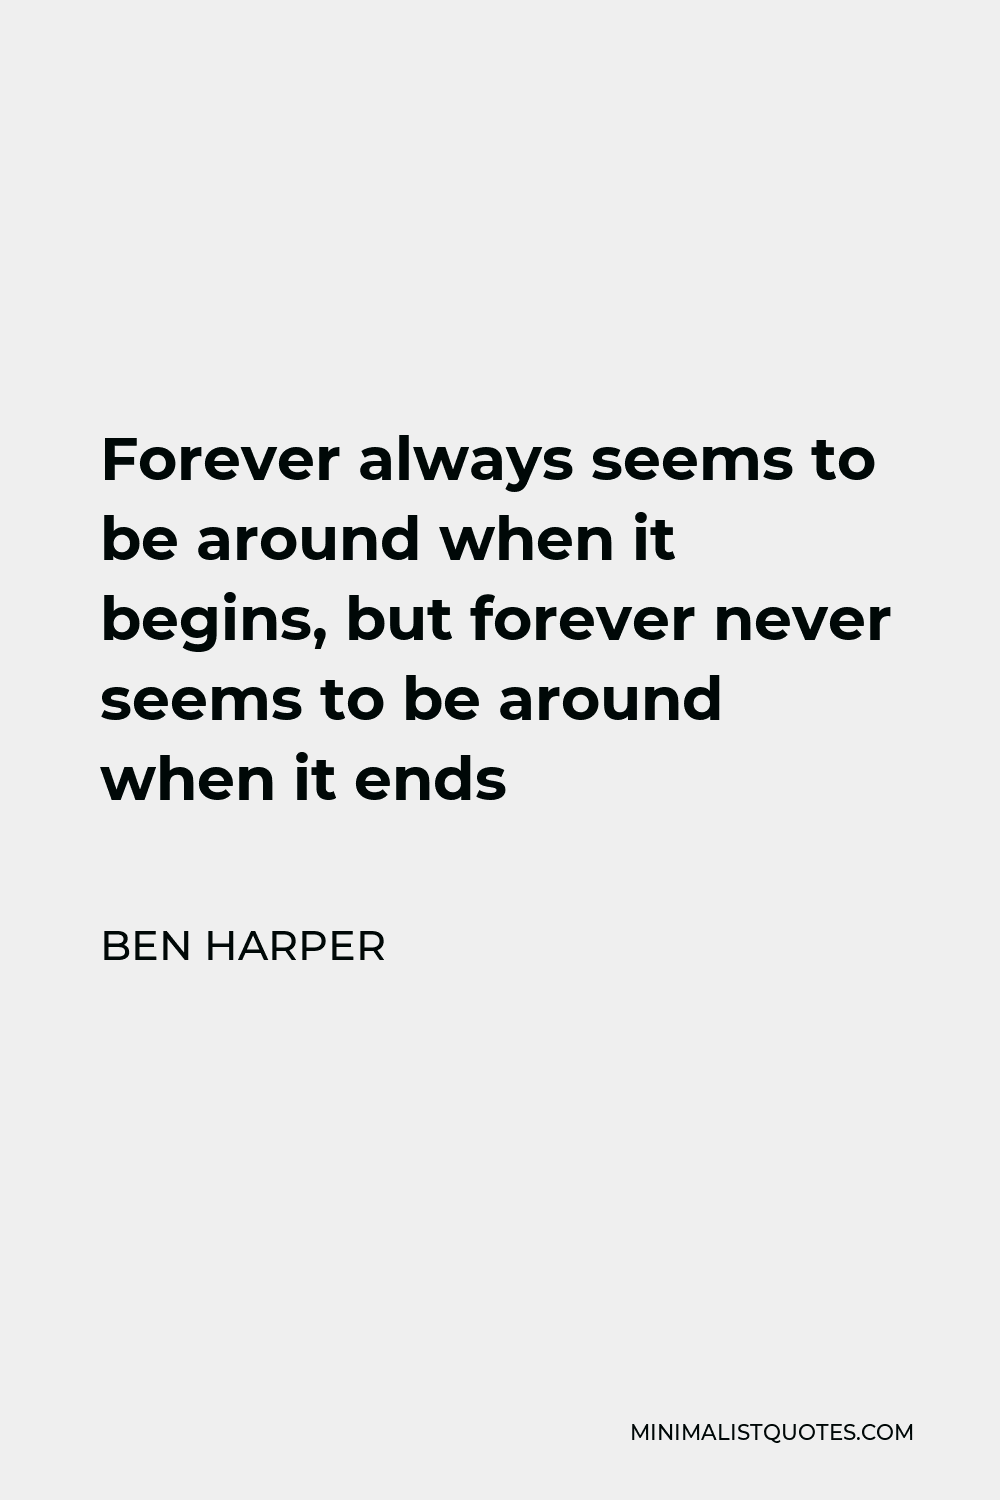 Ben Harper Quote - Forever always seems to be around when it begins, but forever never seems to be around when it ends